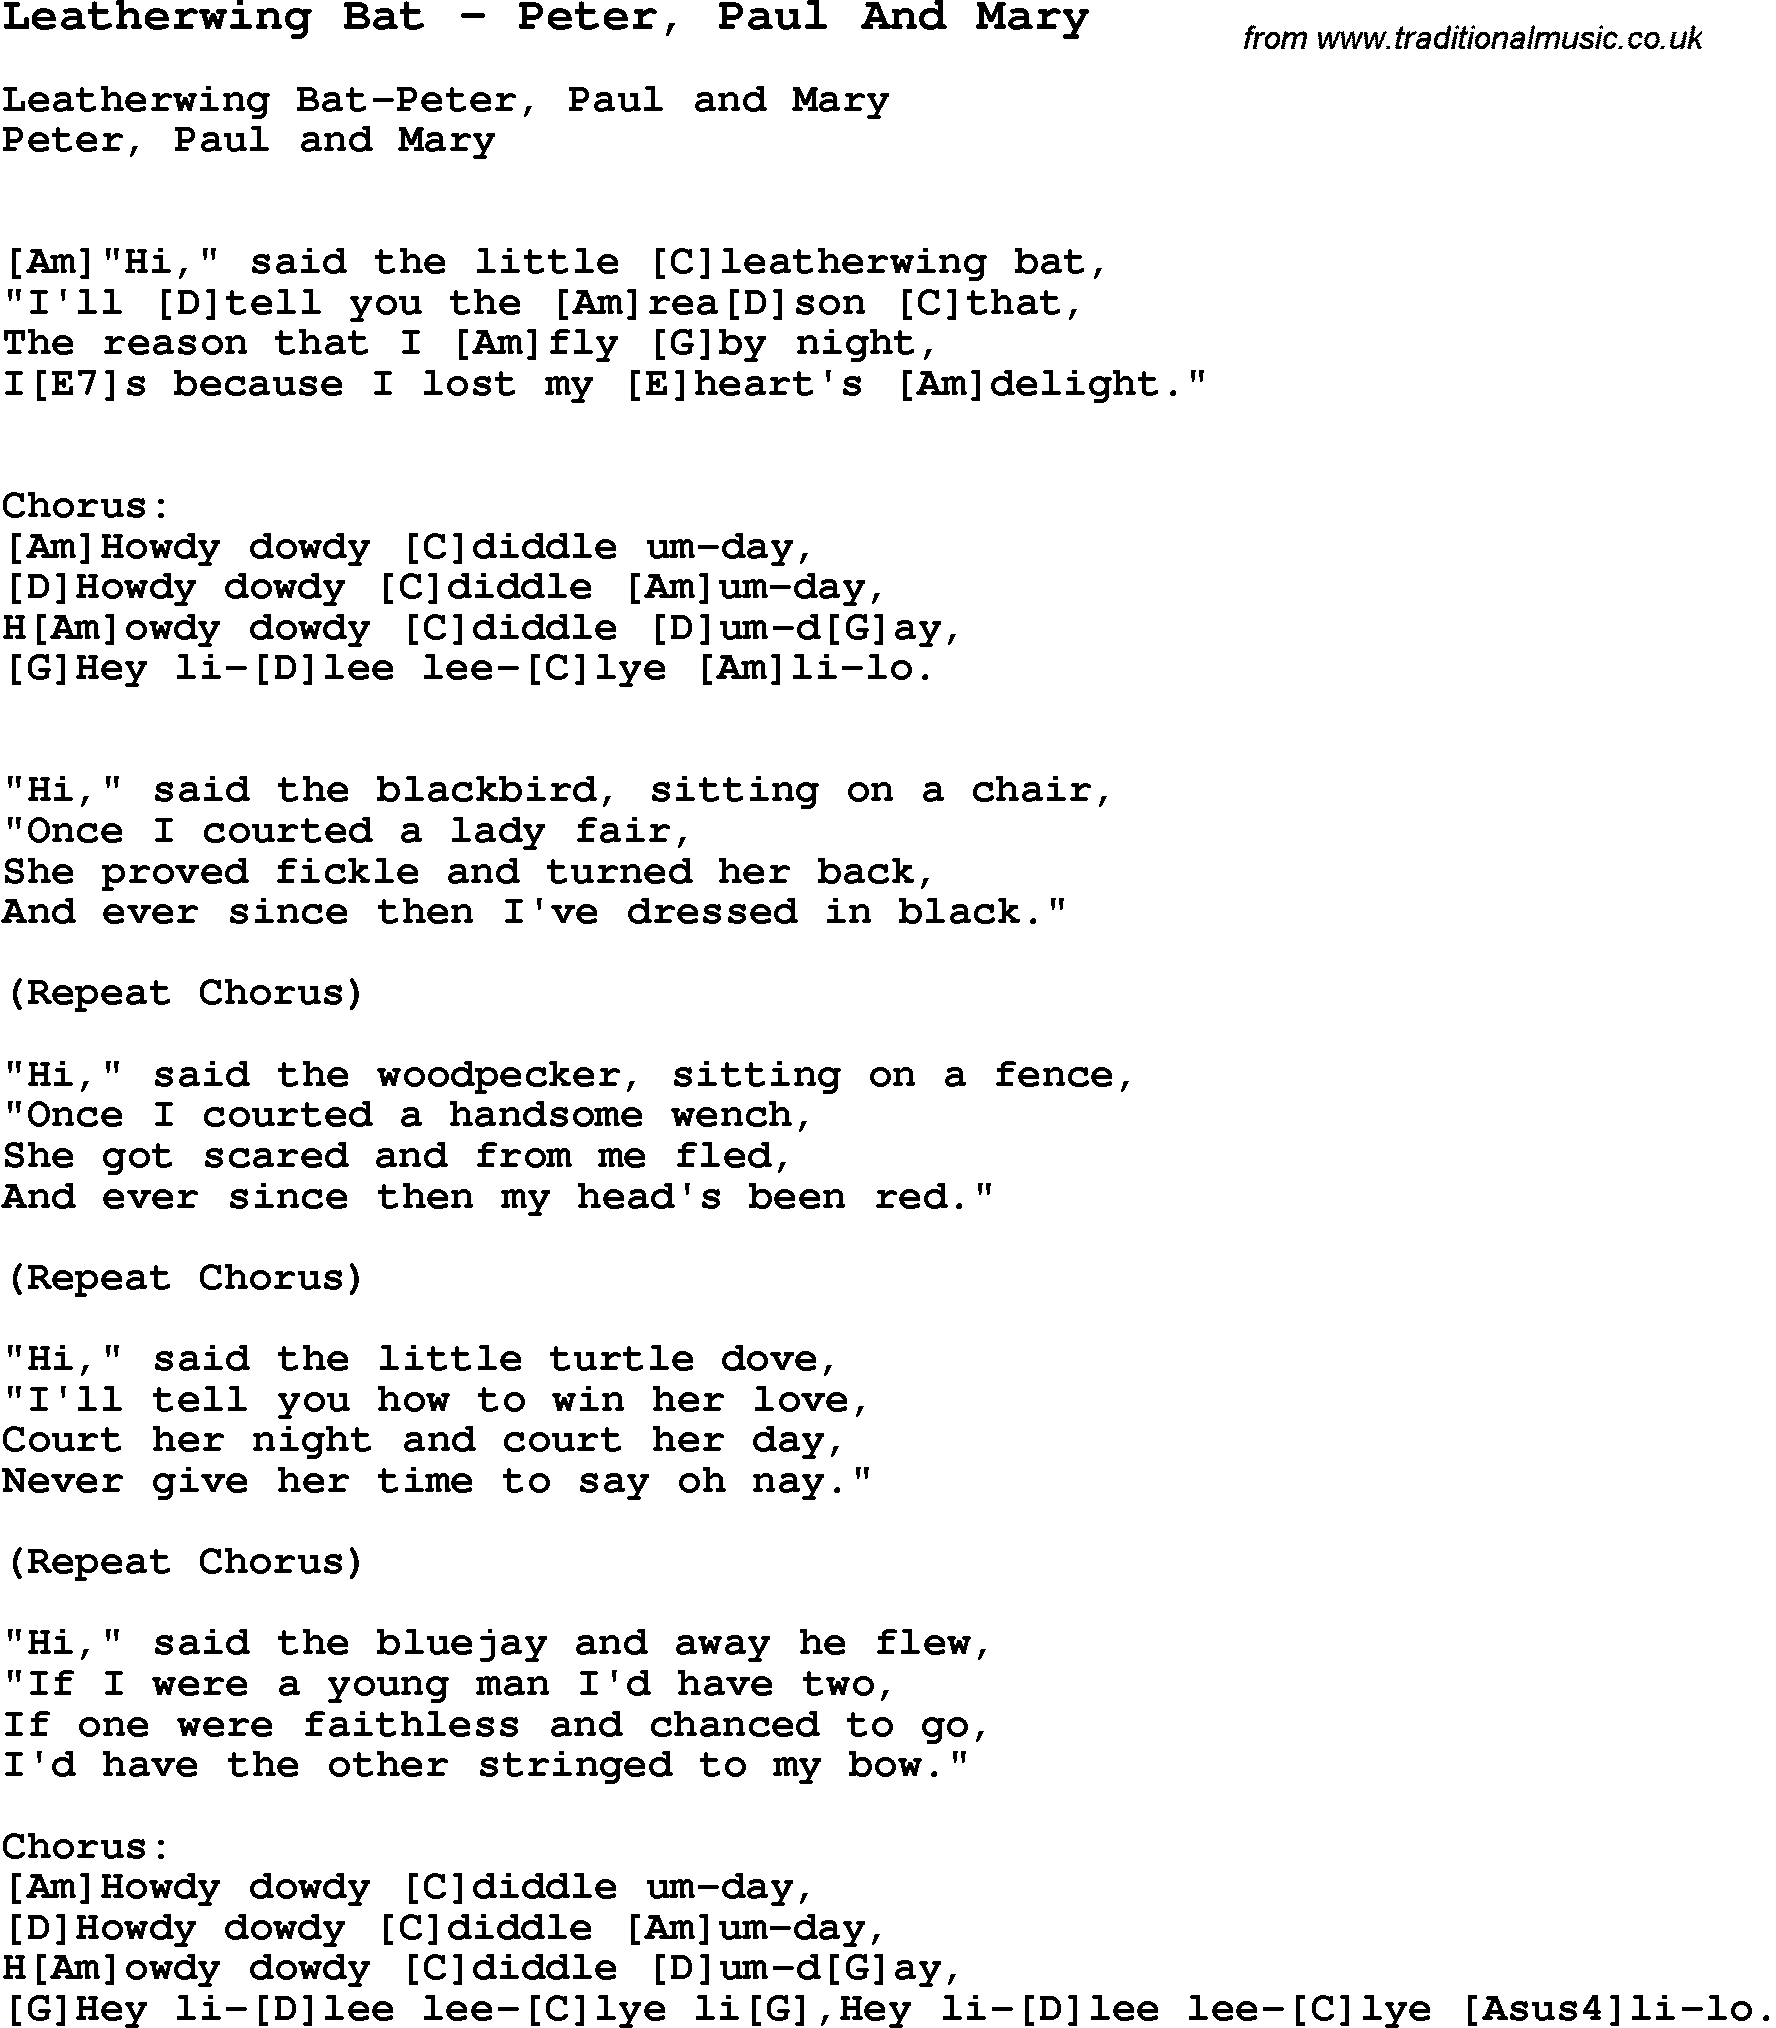 Traditional Song Leatherwing Bat - Peter, Paul And Mary with Chords, Tabs and Lyrics